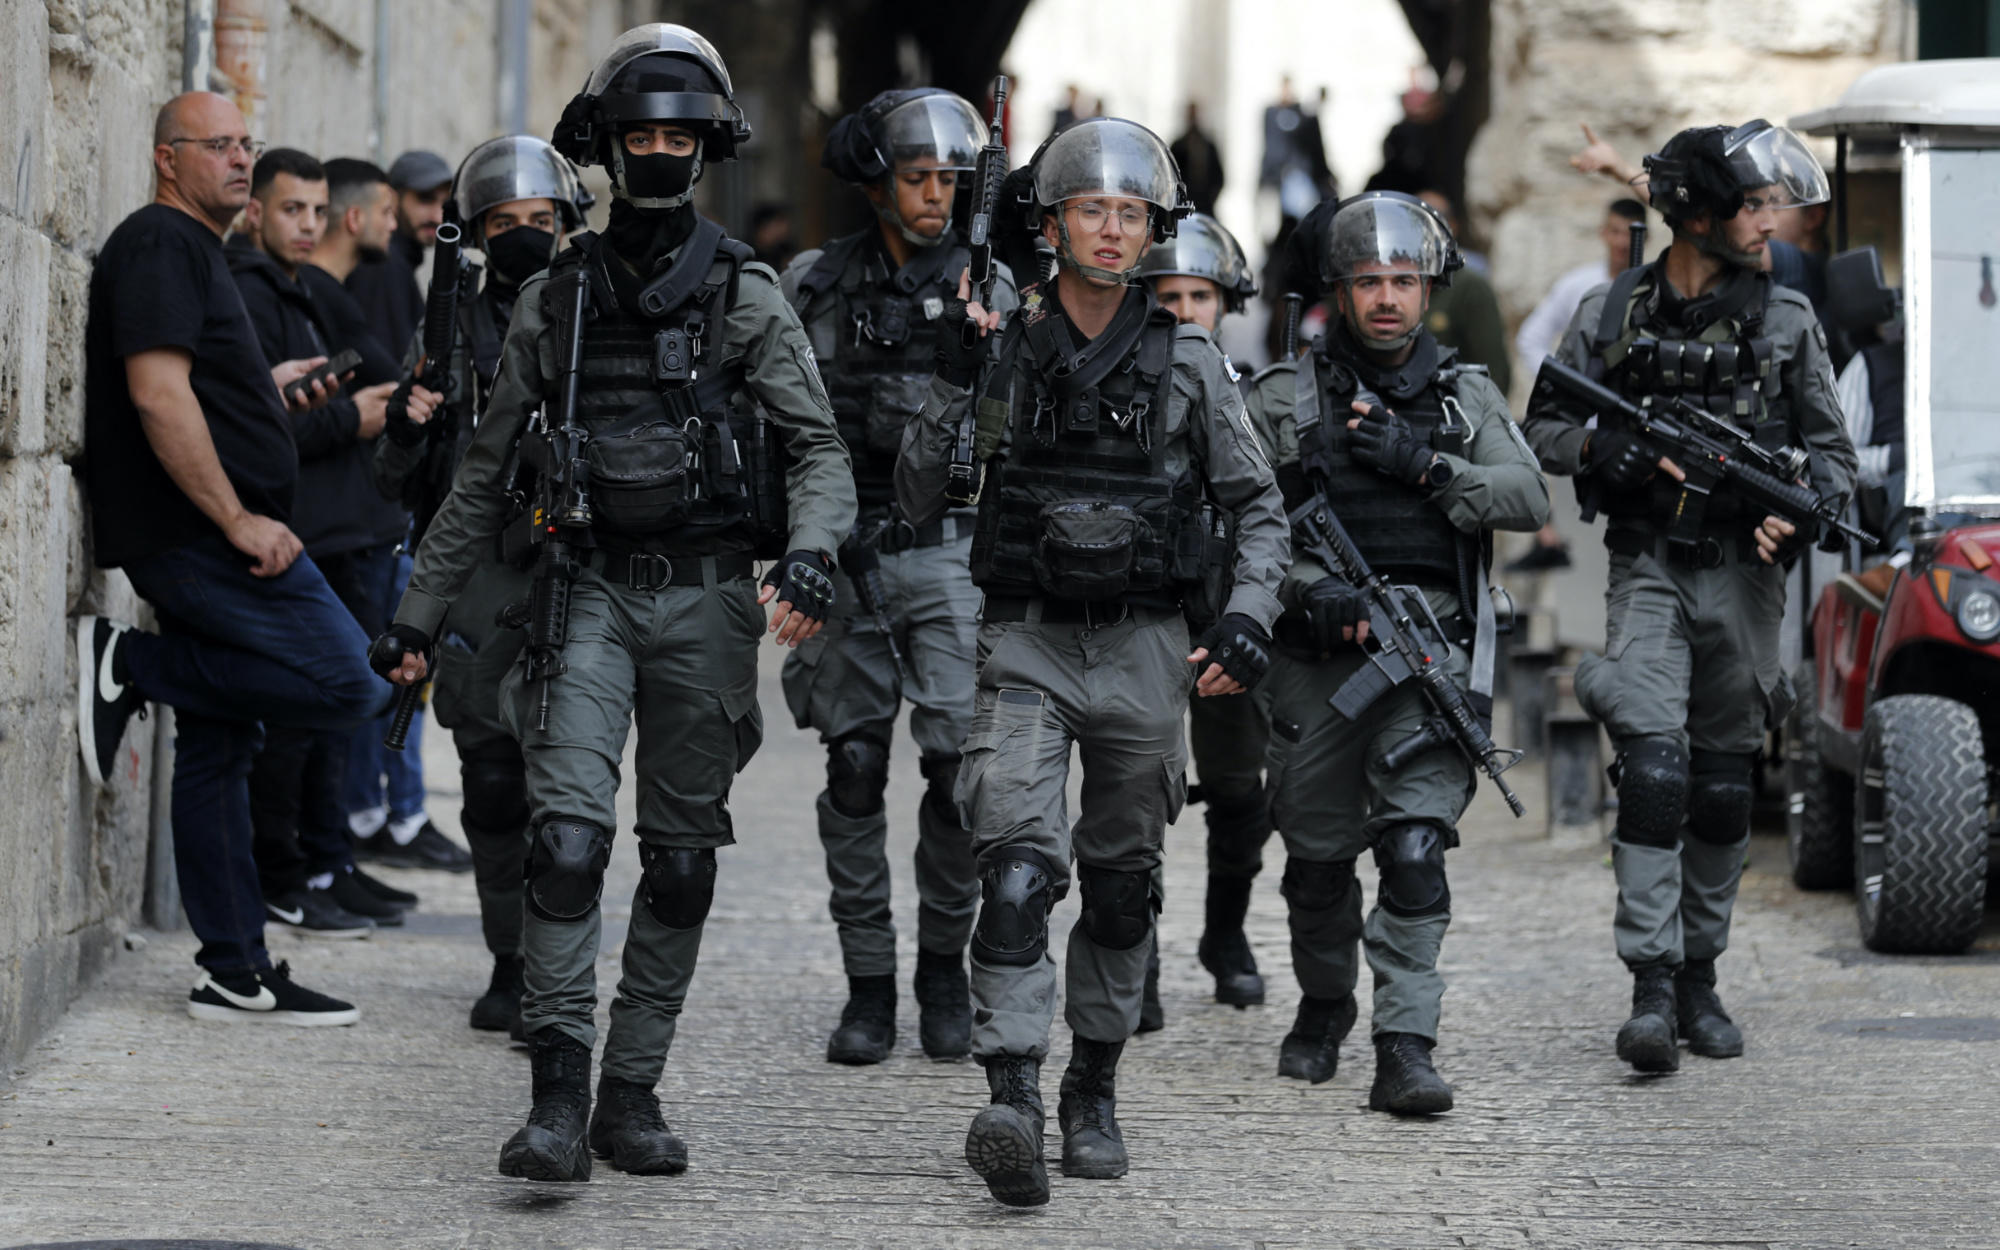 Israeli border police patrol in front of the Lion's Gate in Jerusalem's Old City, as Palestinians wait to be allowed to enter the al-Aqsa Mosque compound, on 17 April 2022 (AFP)